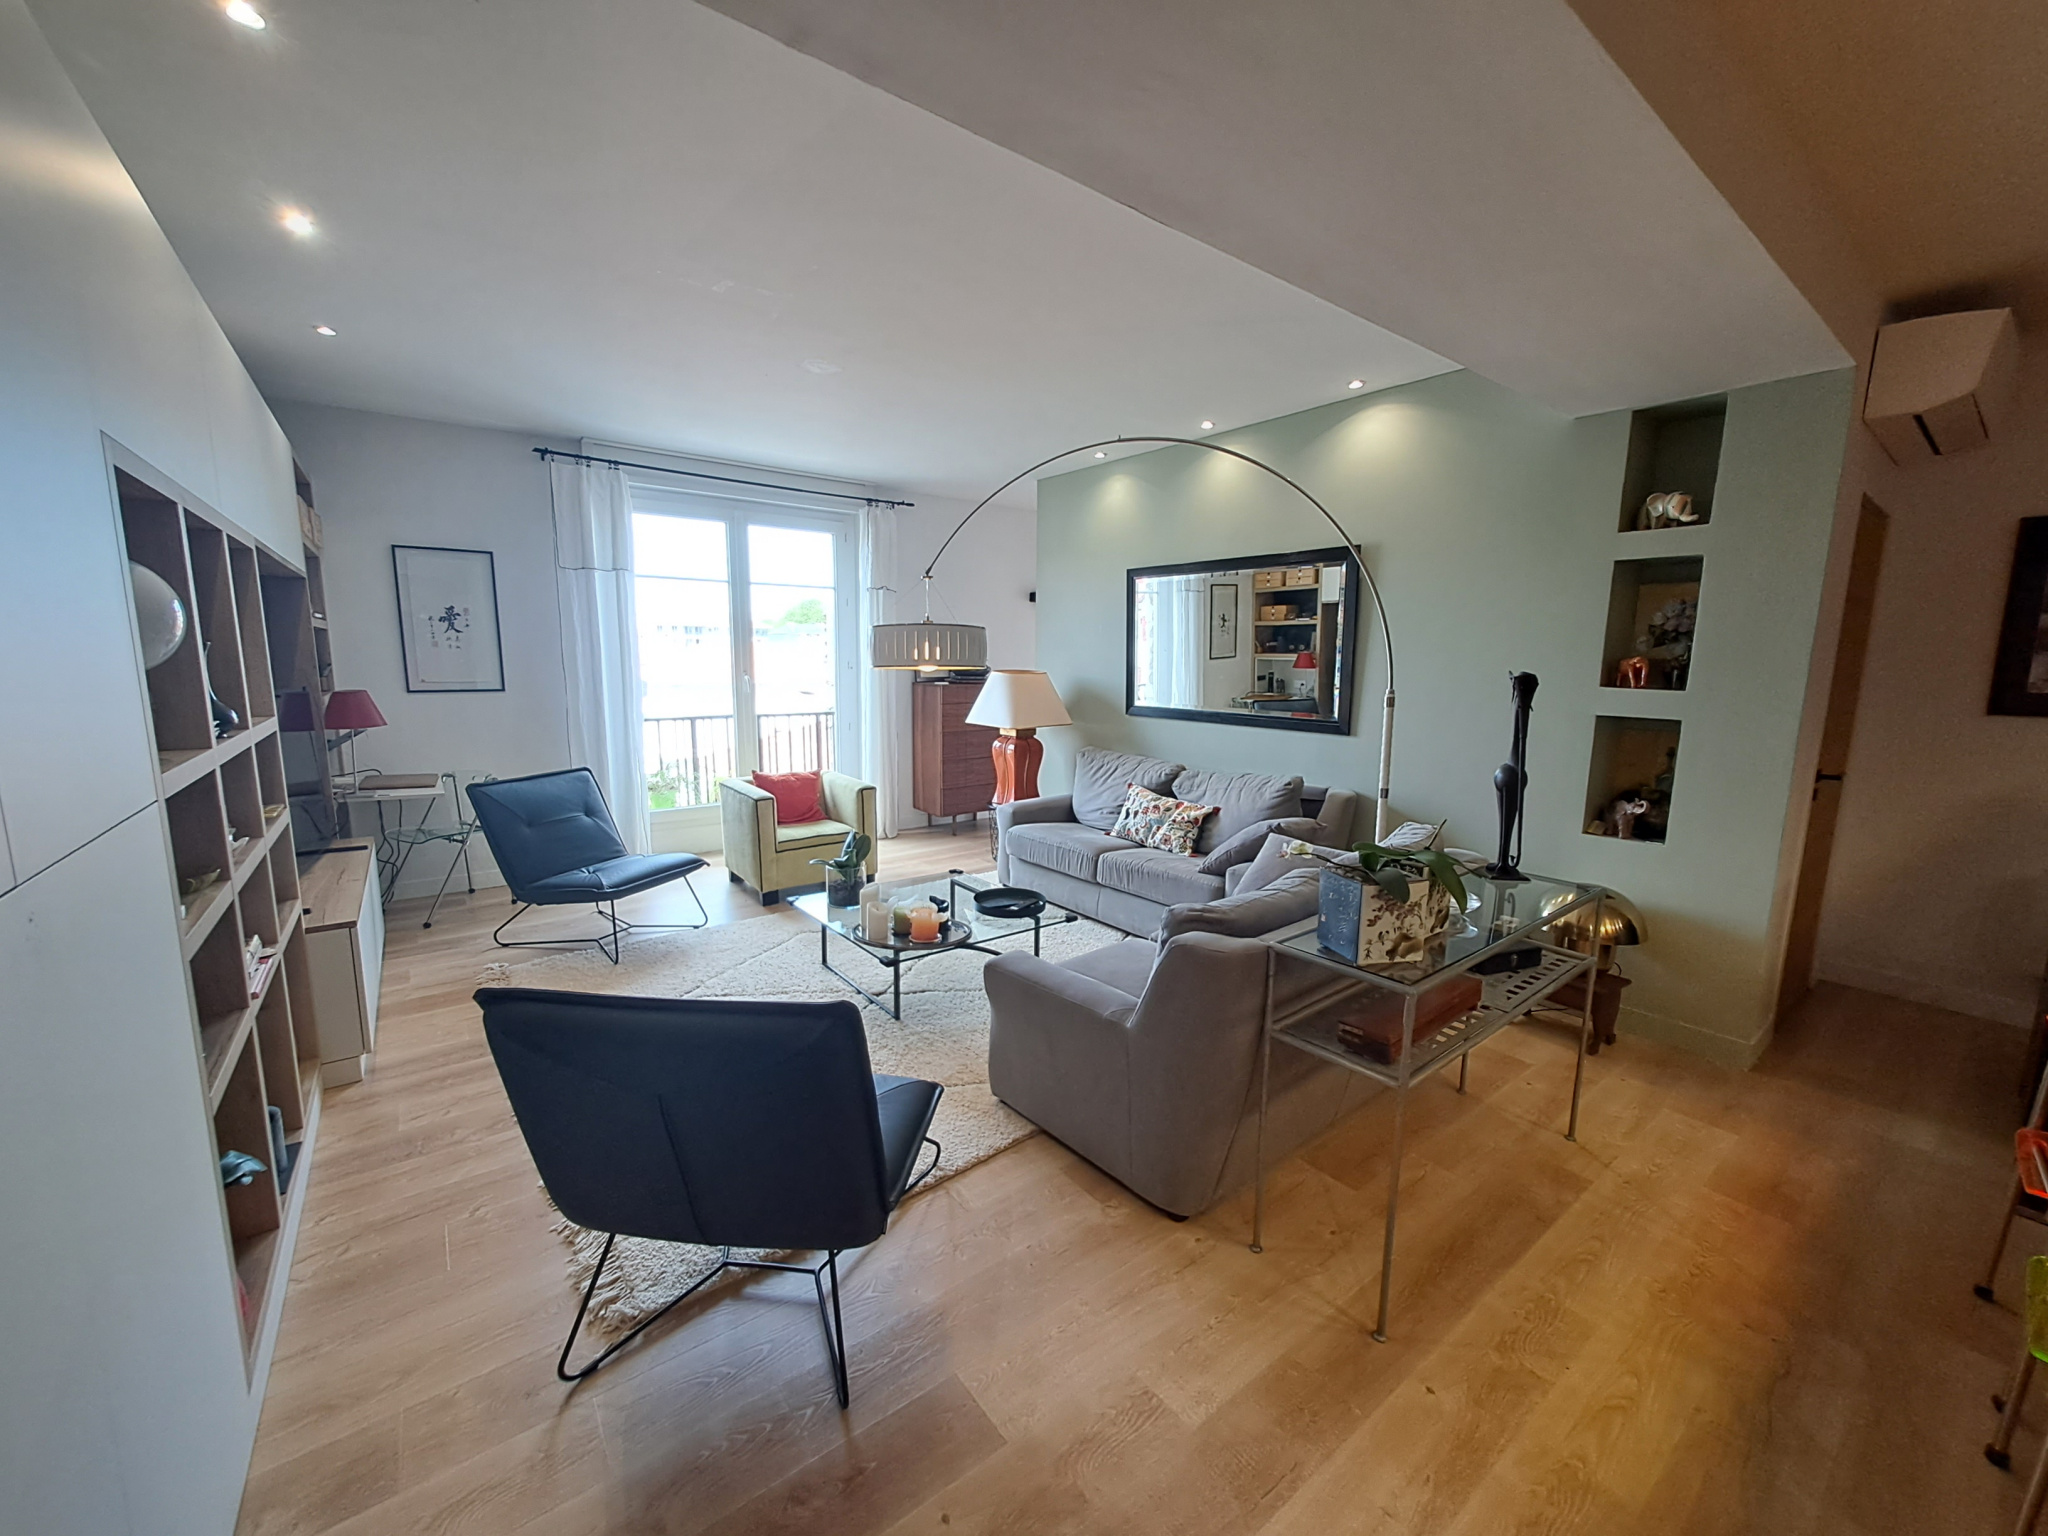 for sale flat in BAYONNE - 735 000